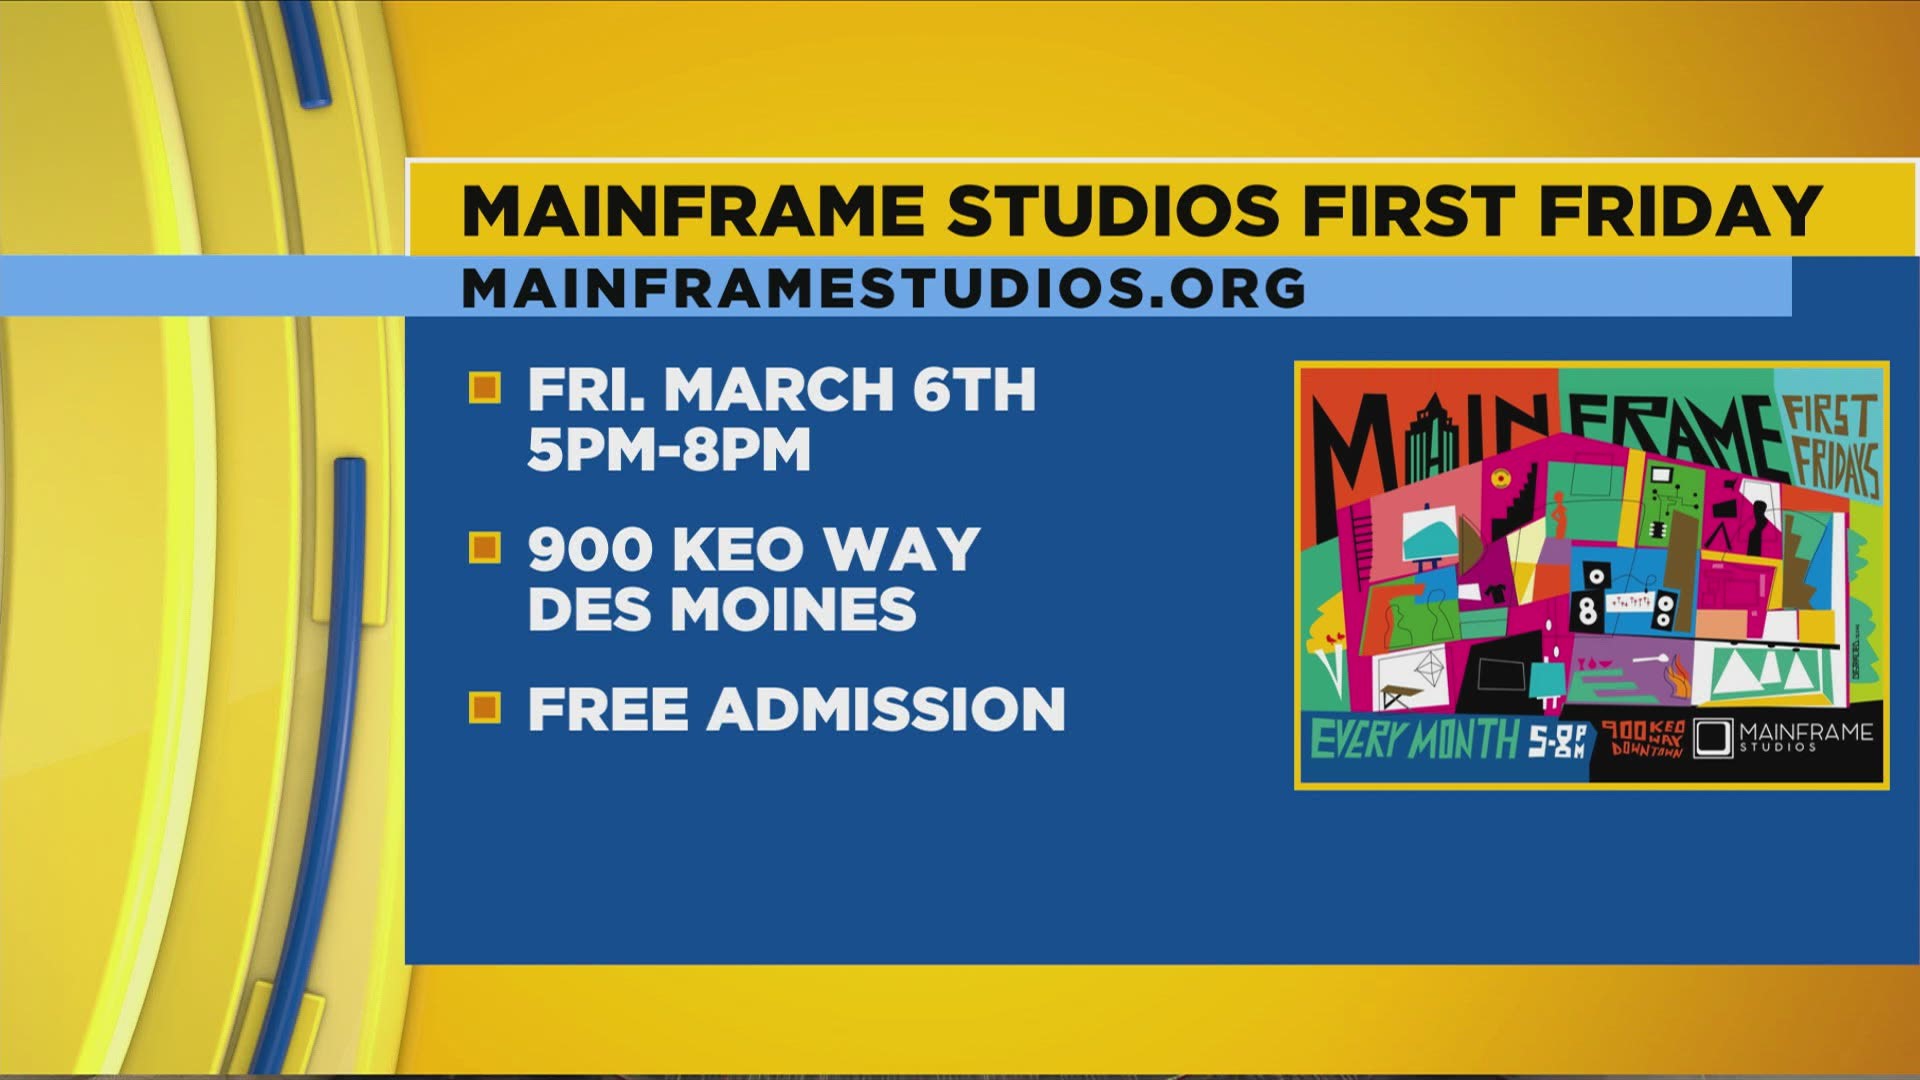 First Friday events at Mainframe Studios are a great way of getting to know the space and artists inside.